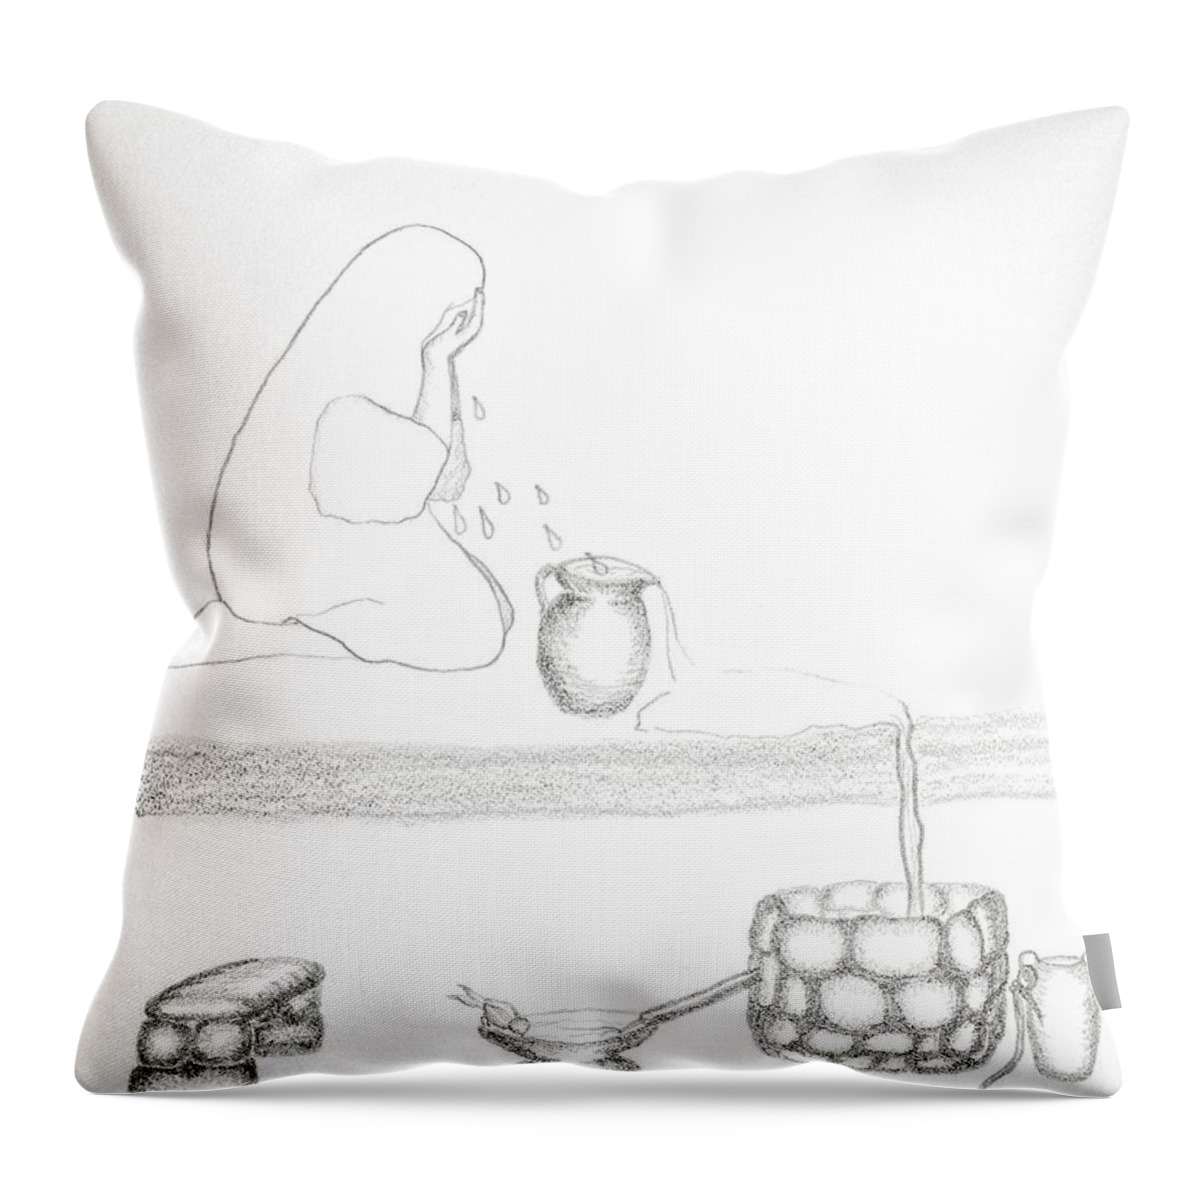 Sorrow Throw Pillow featuring the drawing From Sorrow To Springs by Karen Nice-Webb